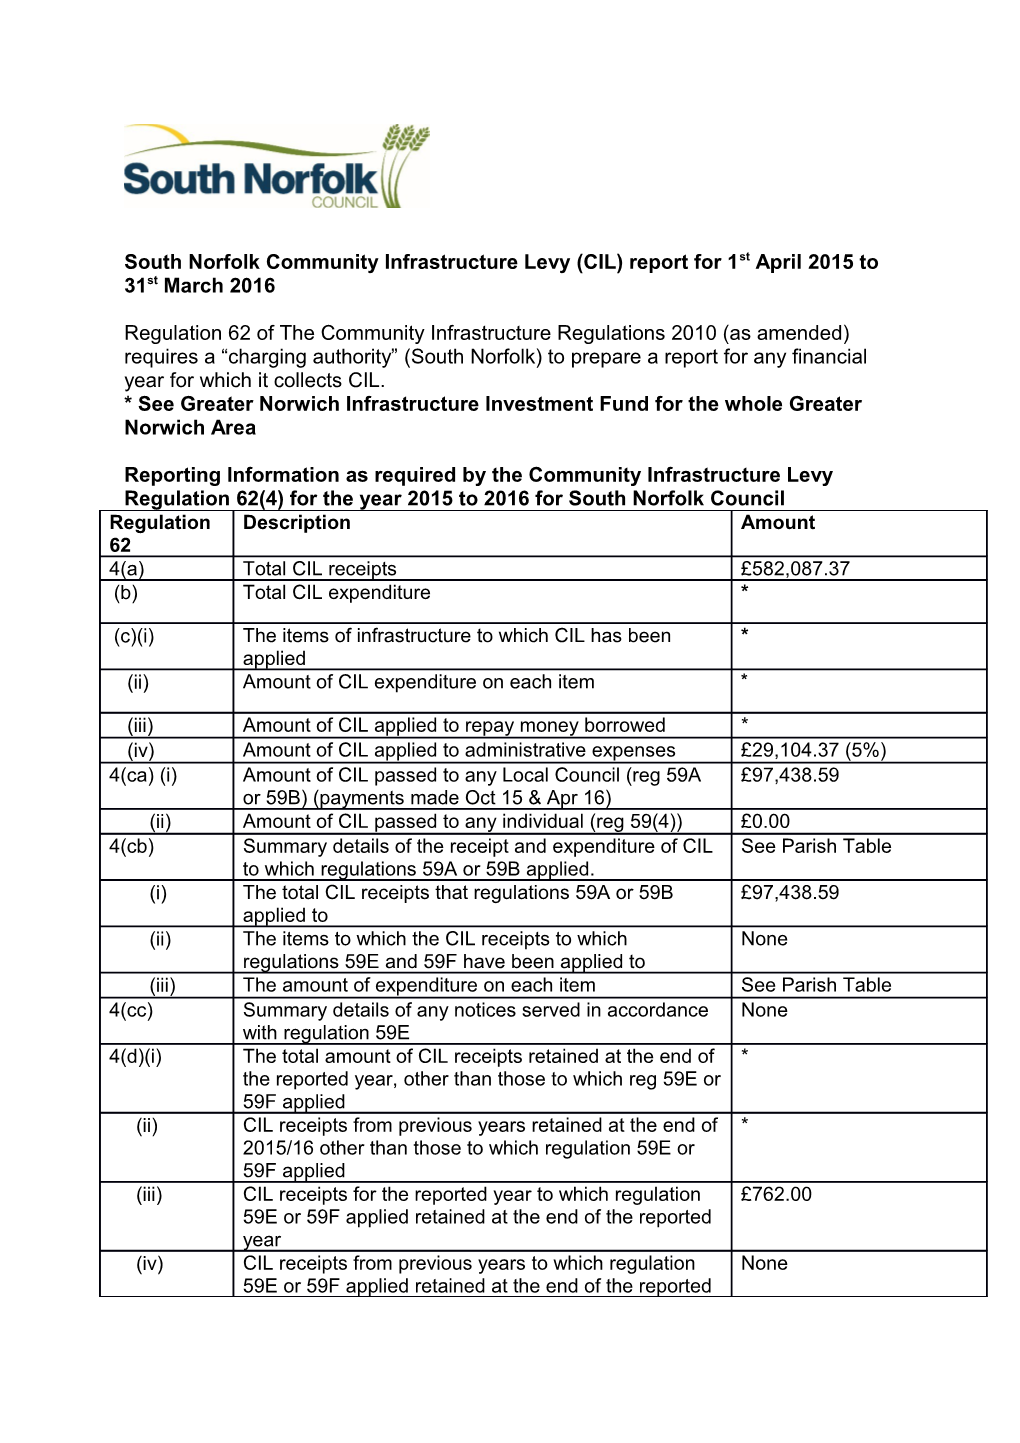 South Norfolk Community Infrastructure Levy (CIL) Report for 1St April 2015 to 31St March 2016